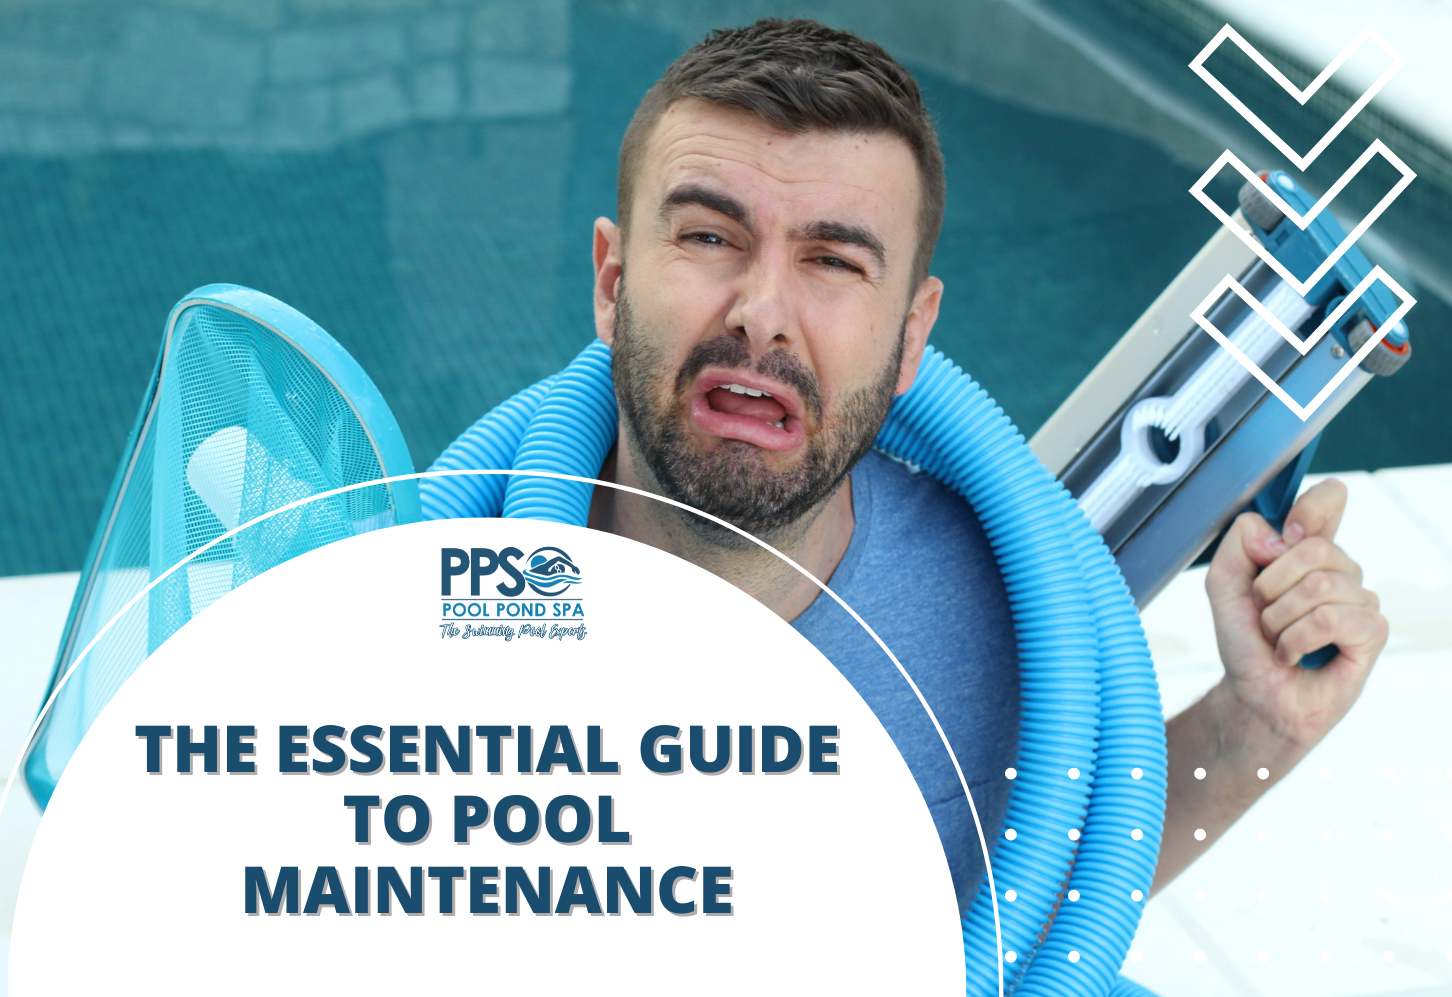 The essential guide to pool maintenance